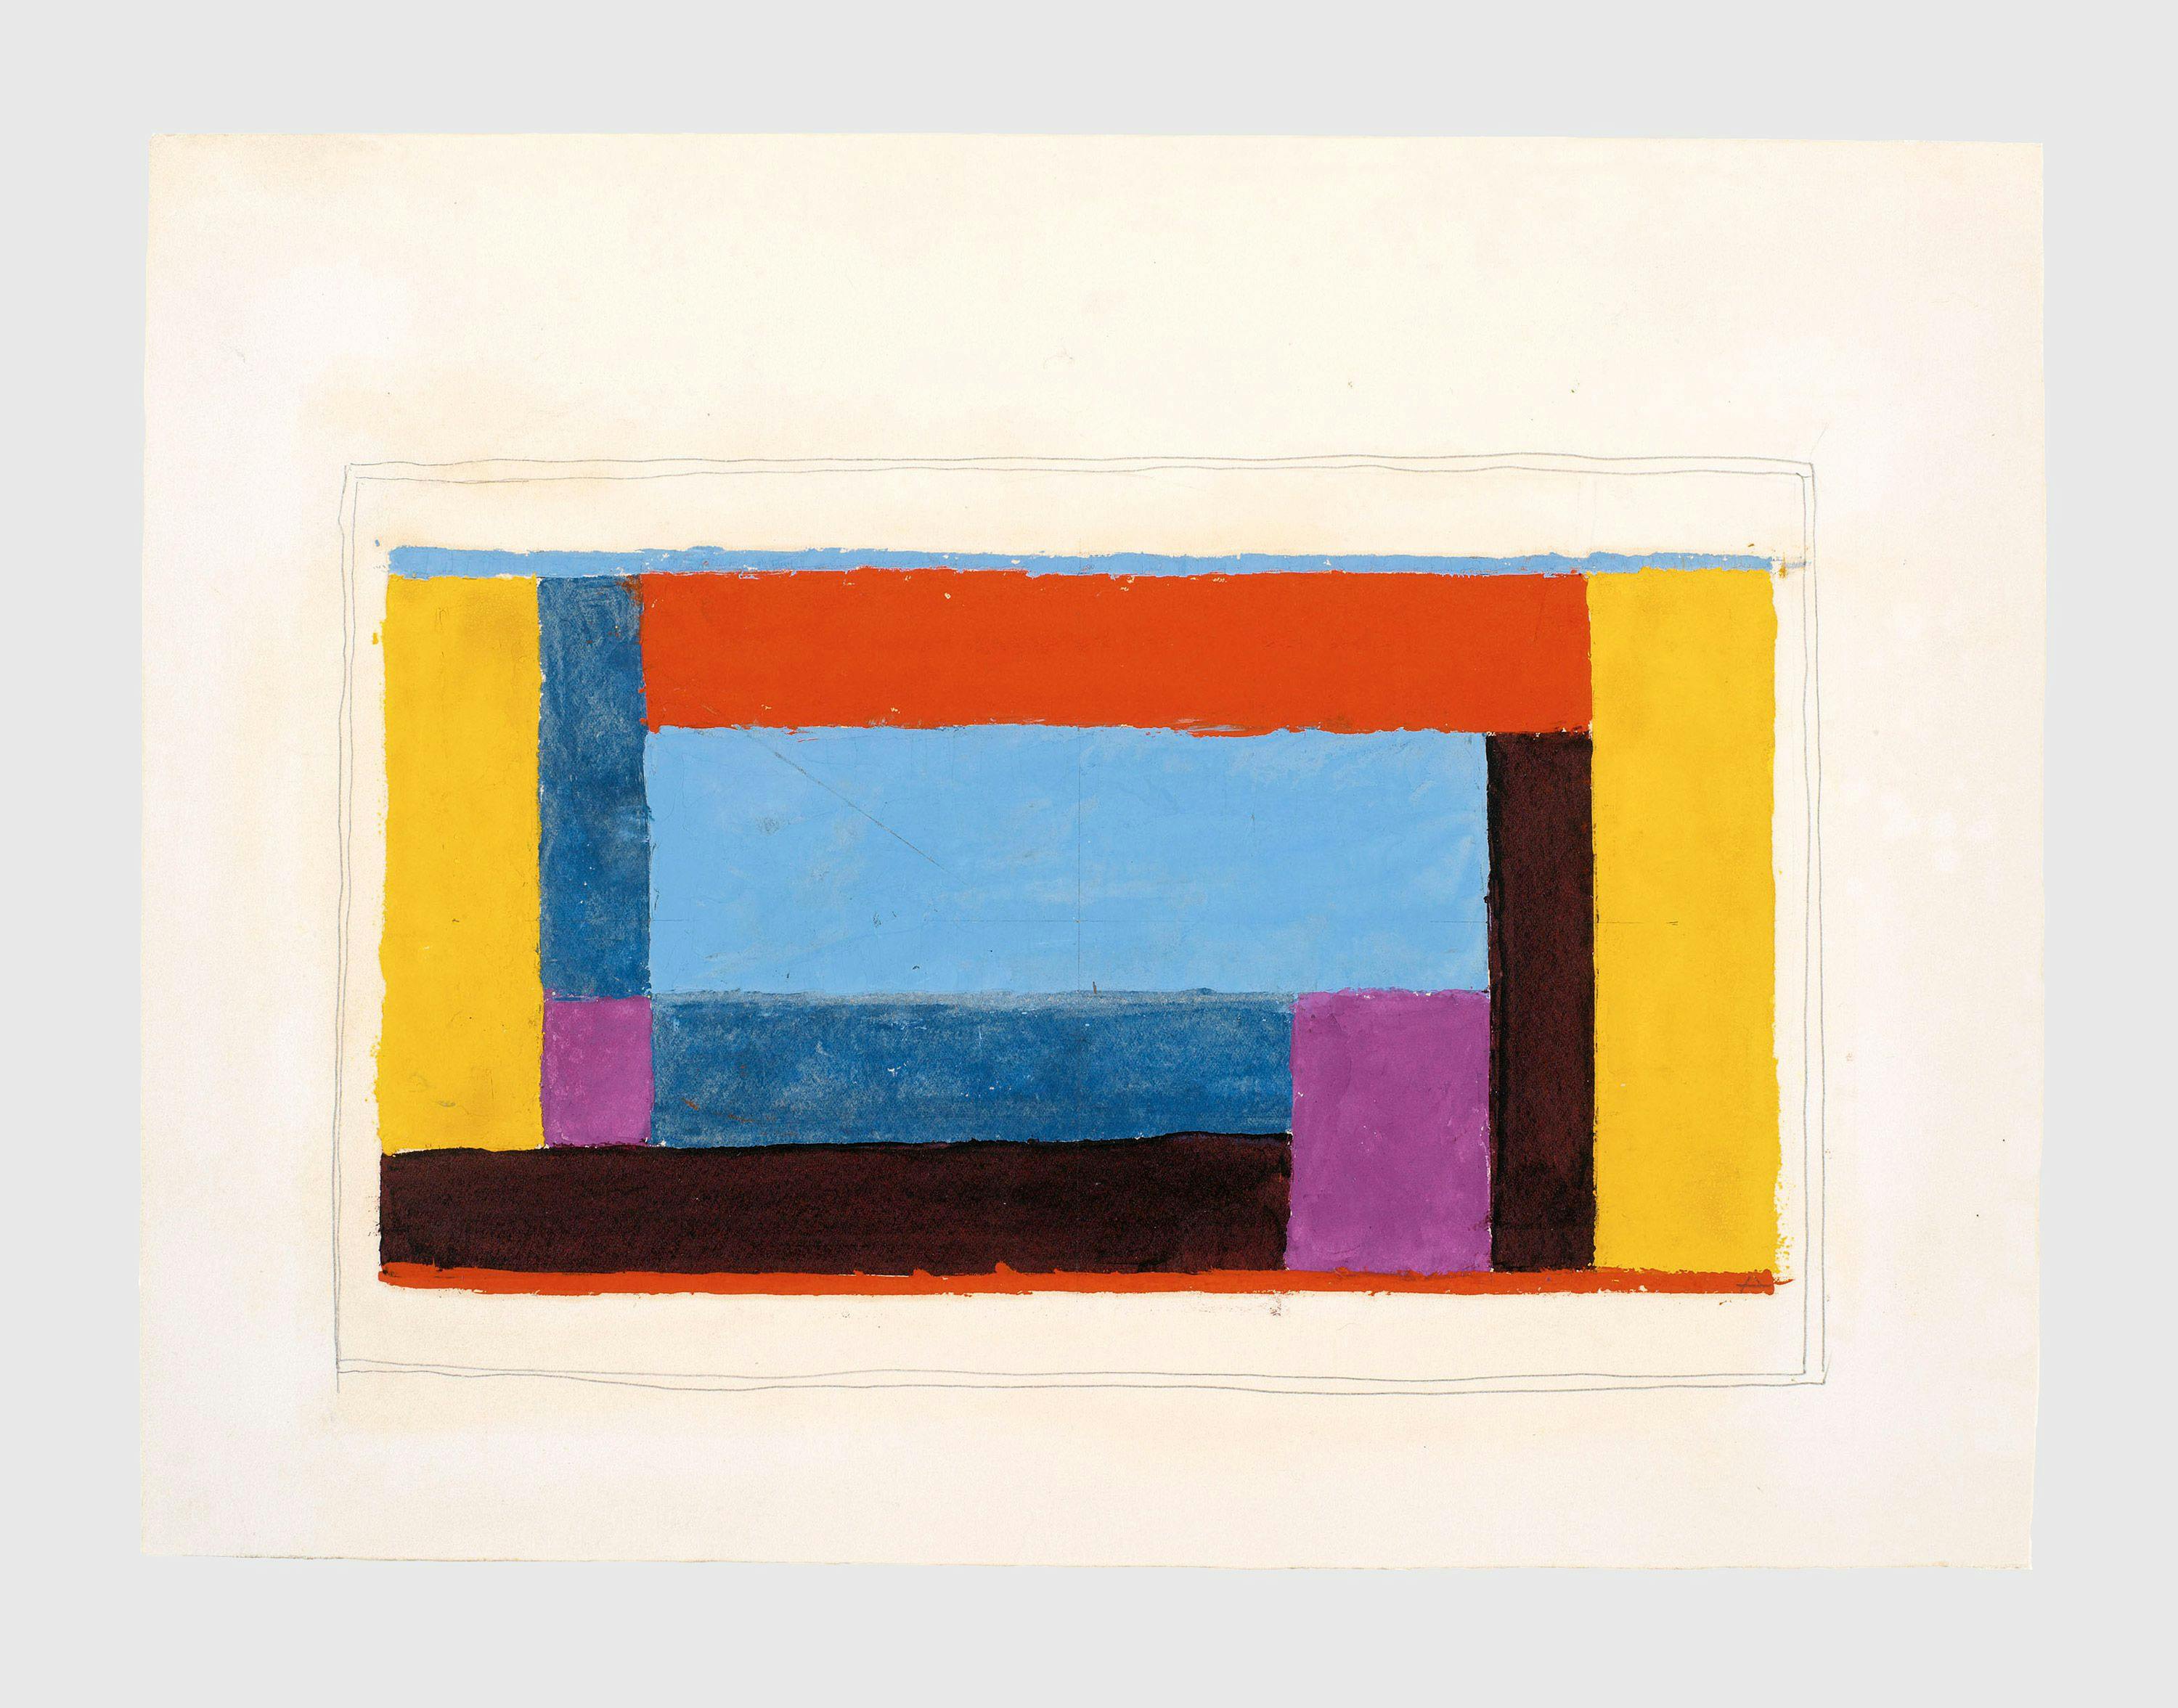 A painting by Josef Albers, titled Study for Airy Center, circa 1938.